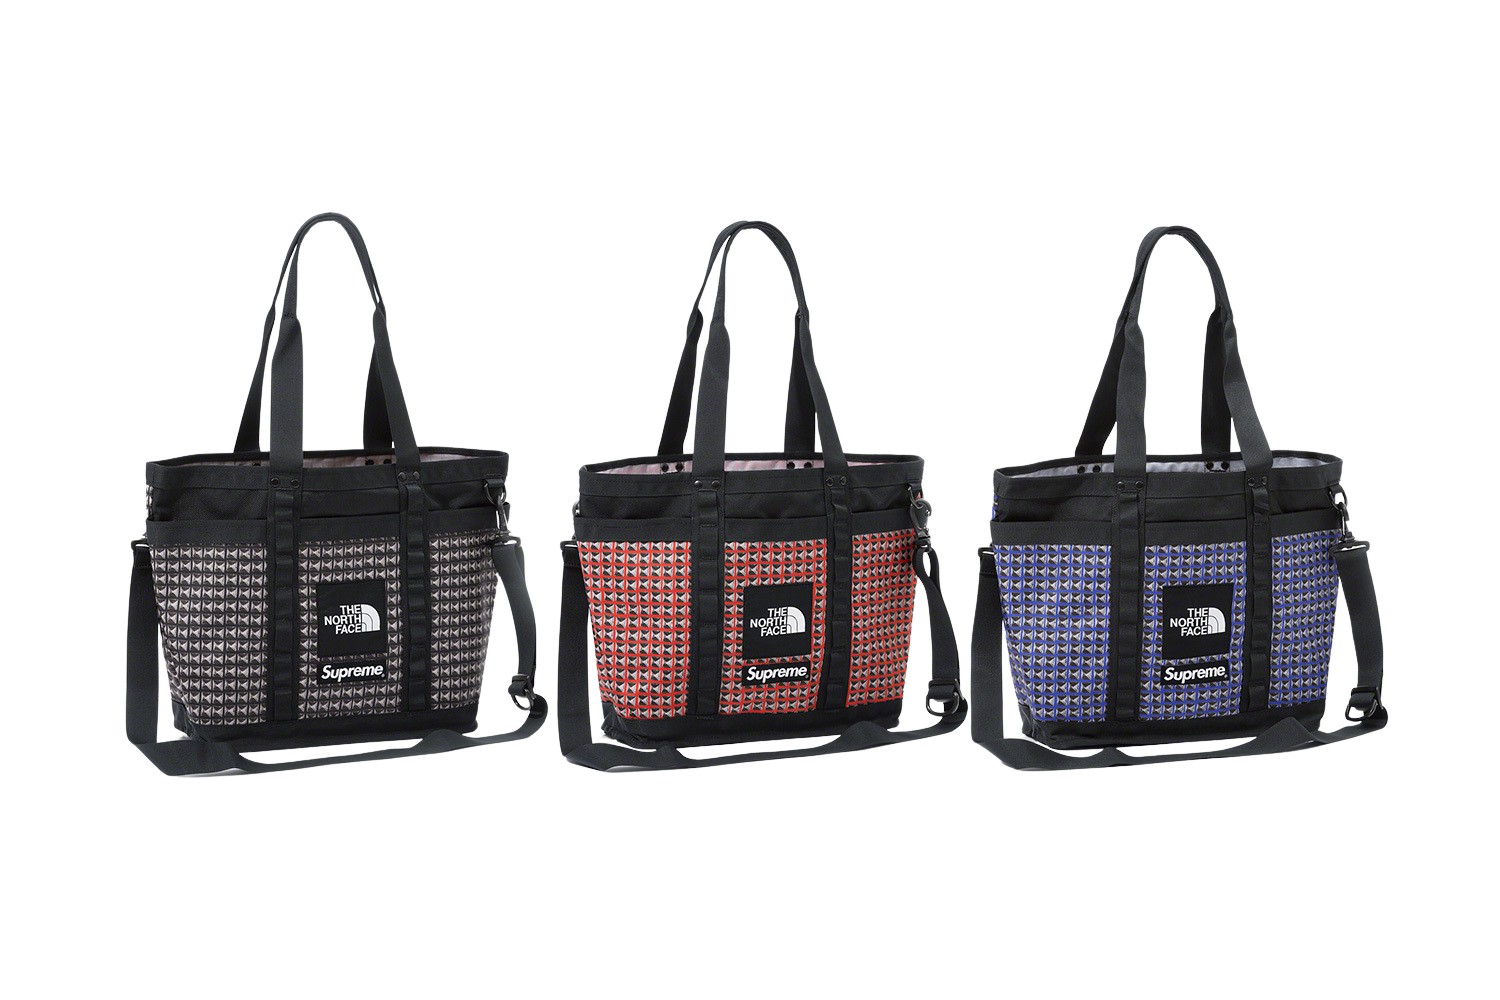 Supreme The North Face Studded Tote